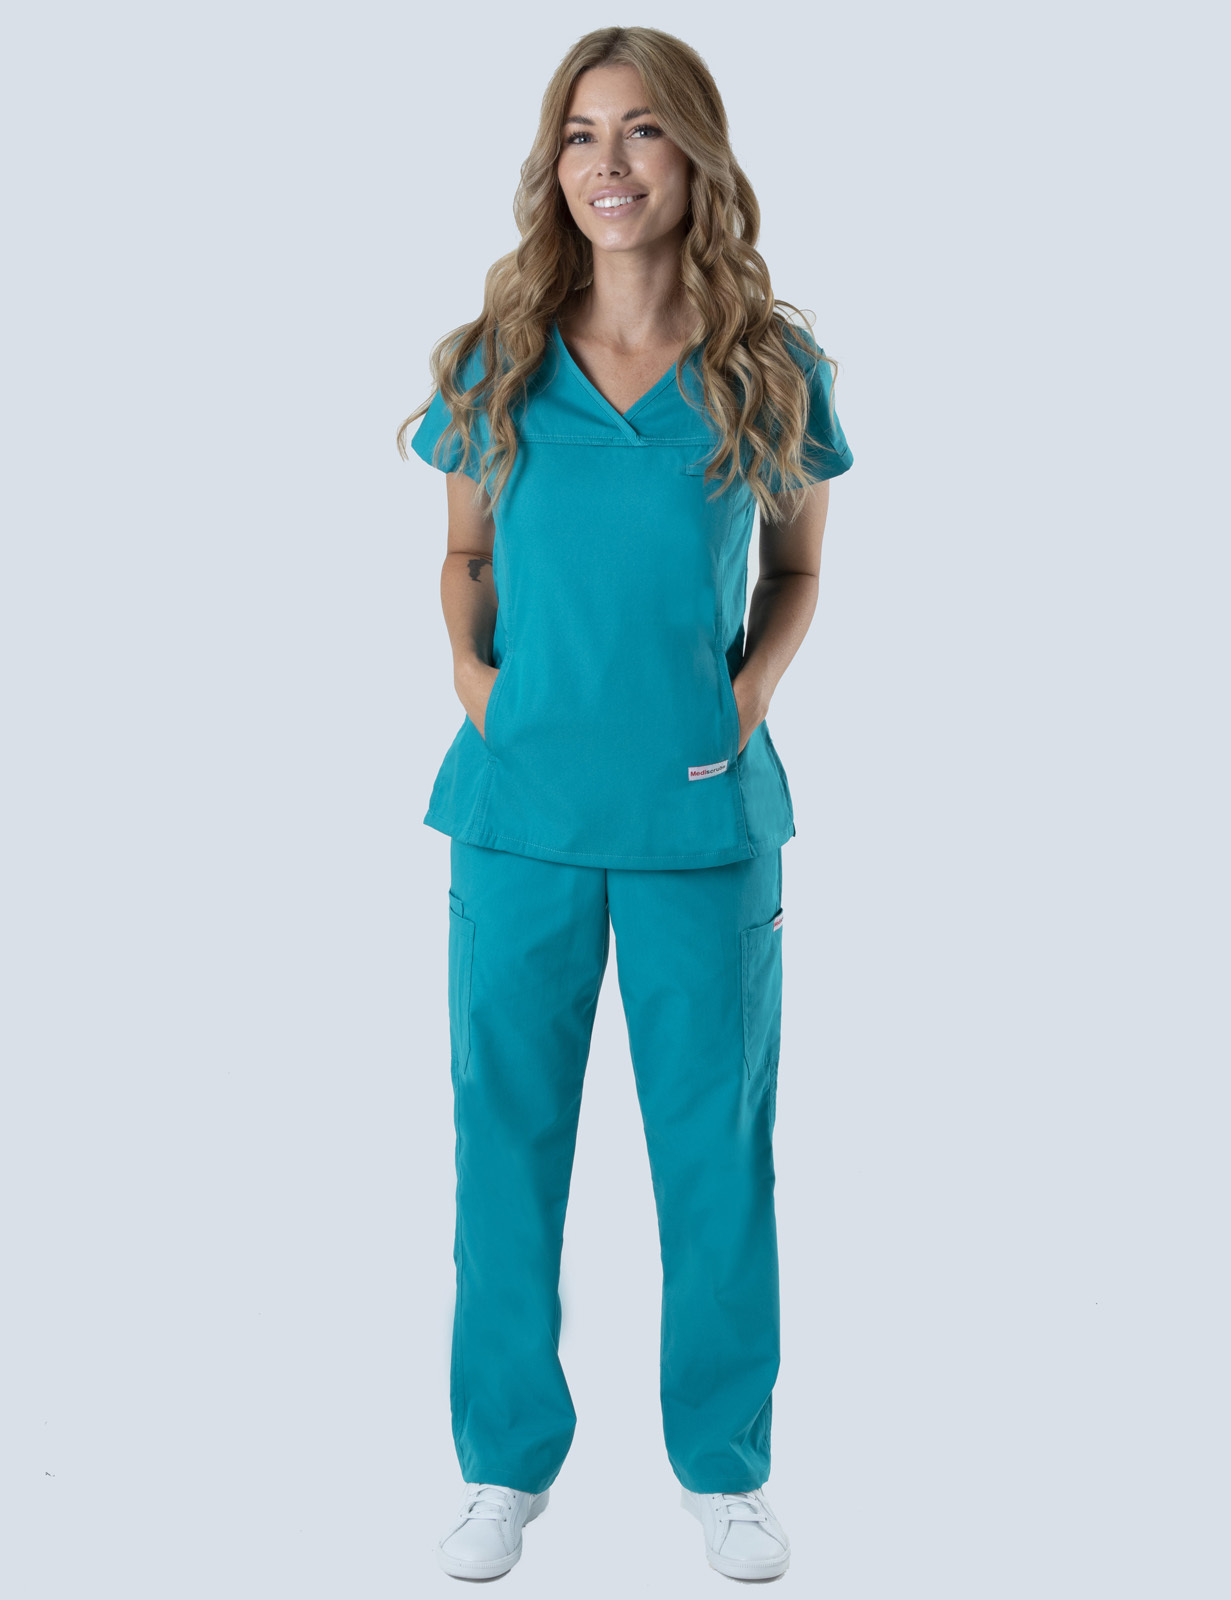 RBWH - IMS CCU RN (Women's Fit Solid Scrub Top and Cargo Pants in teal incl Logos)